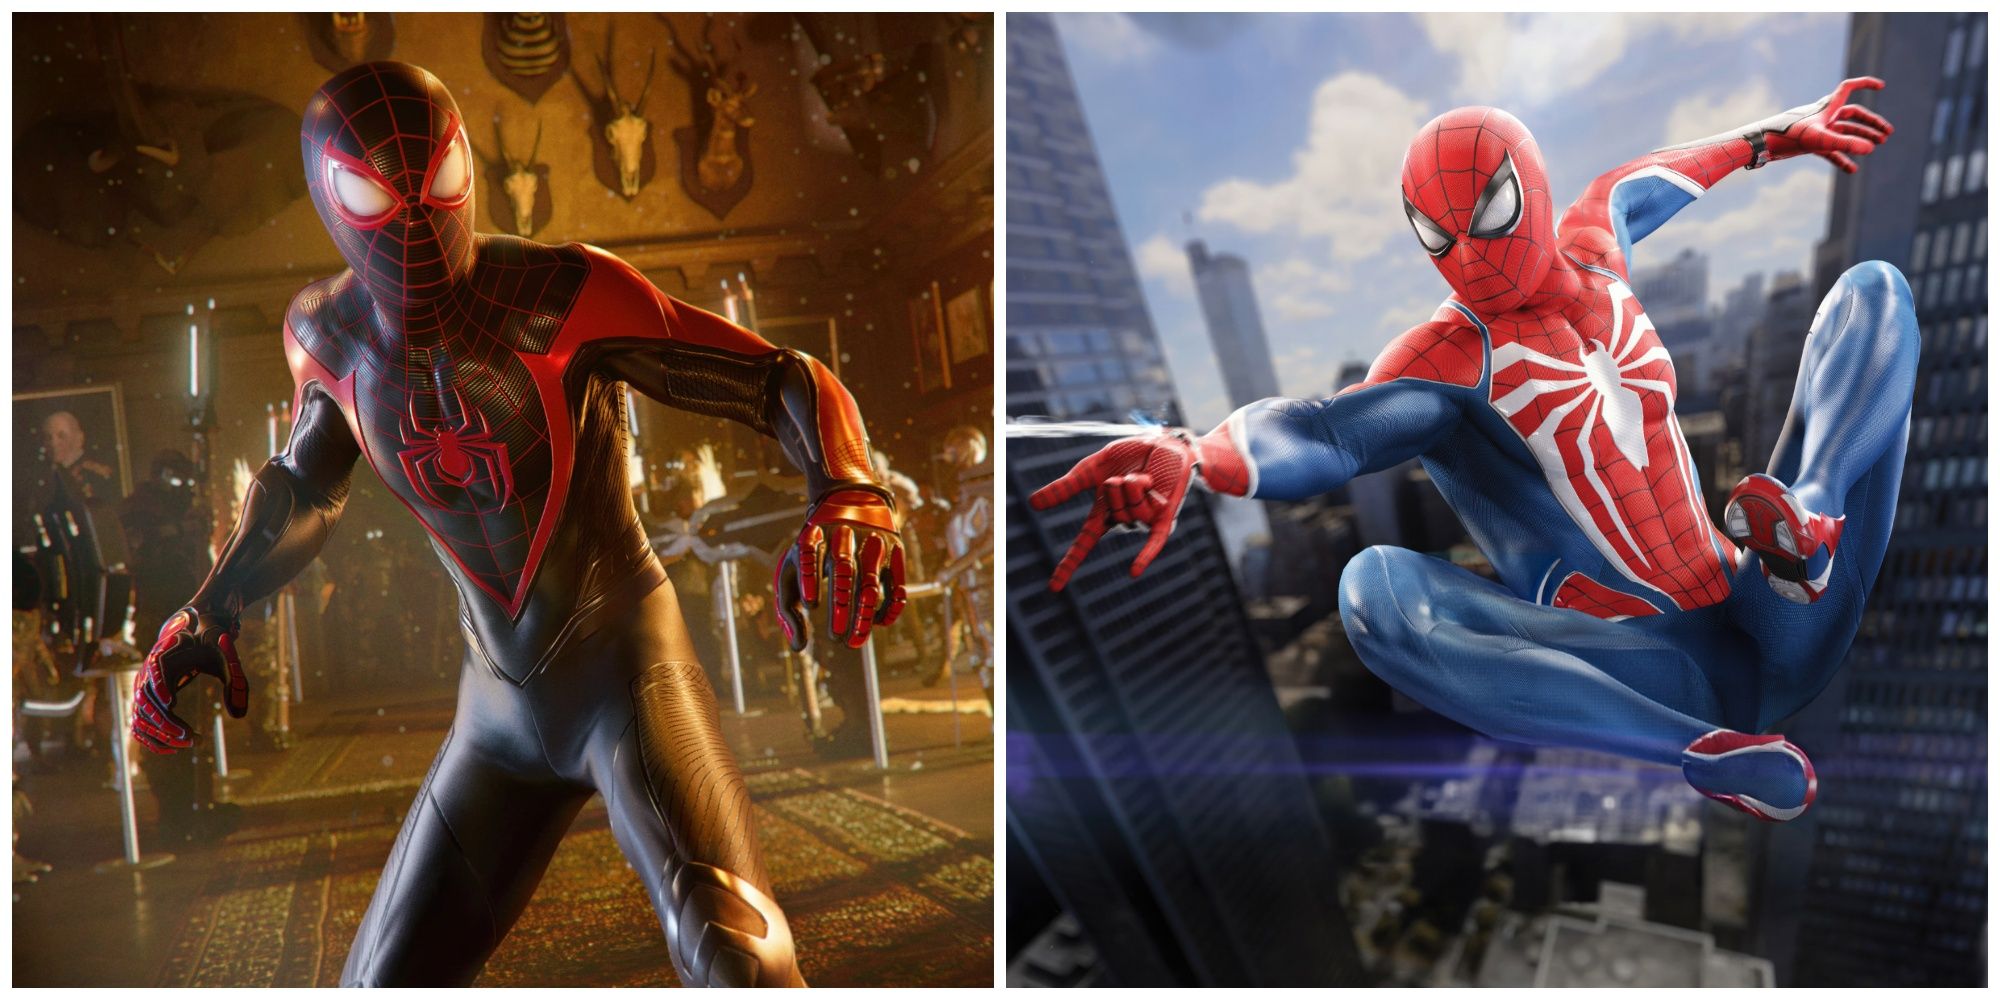 Another Early Spider-Man 2 Reviewer Claims Reaching Platinum While